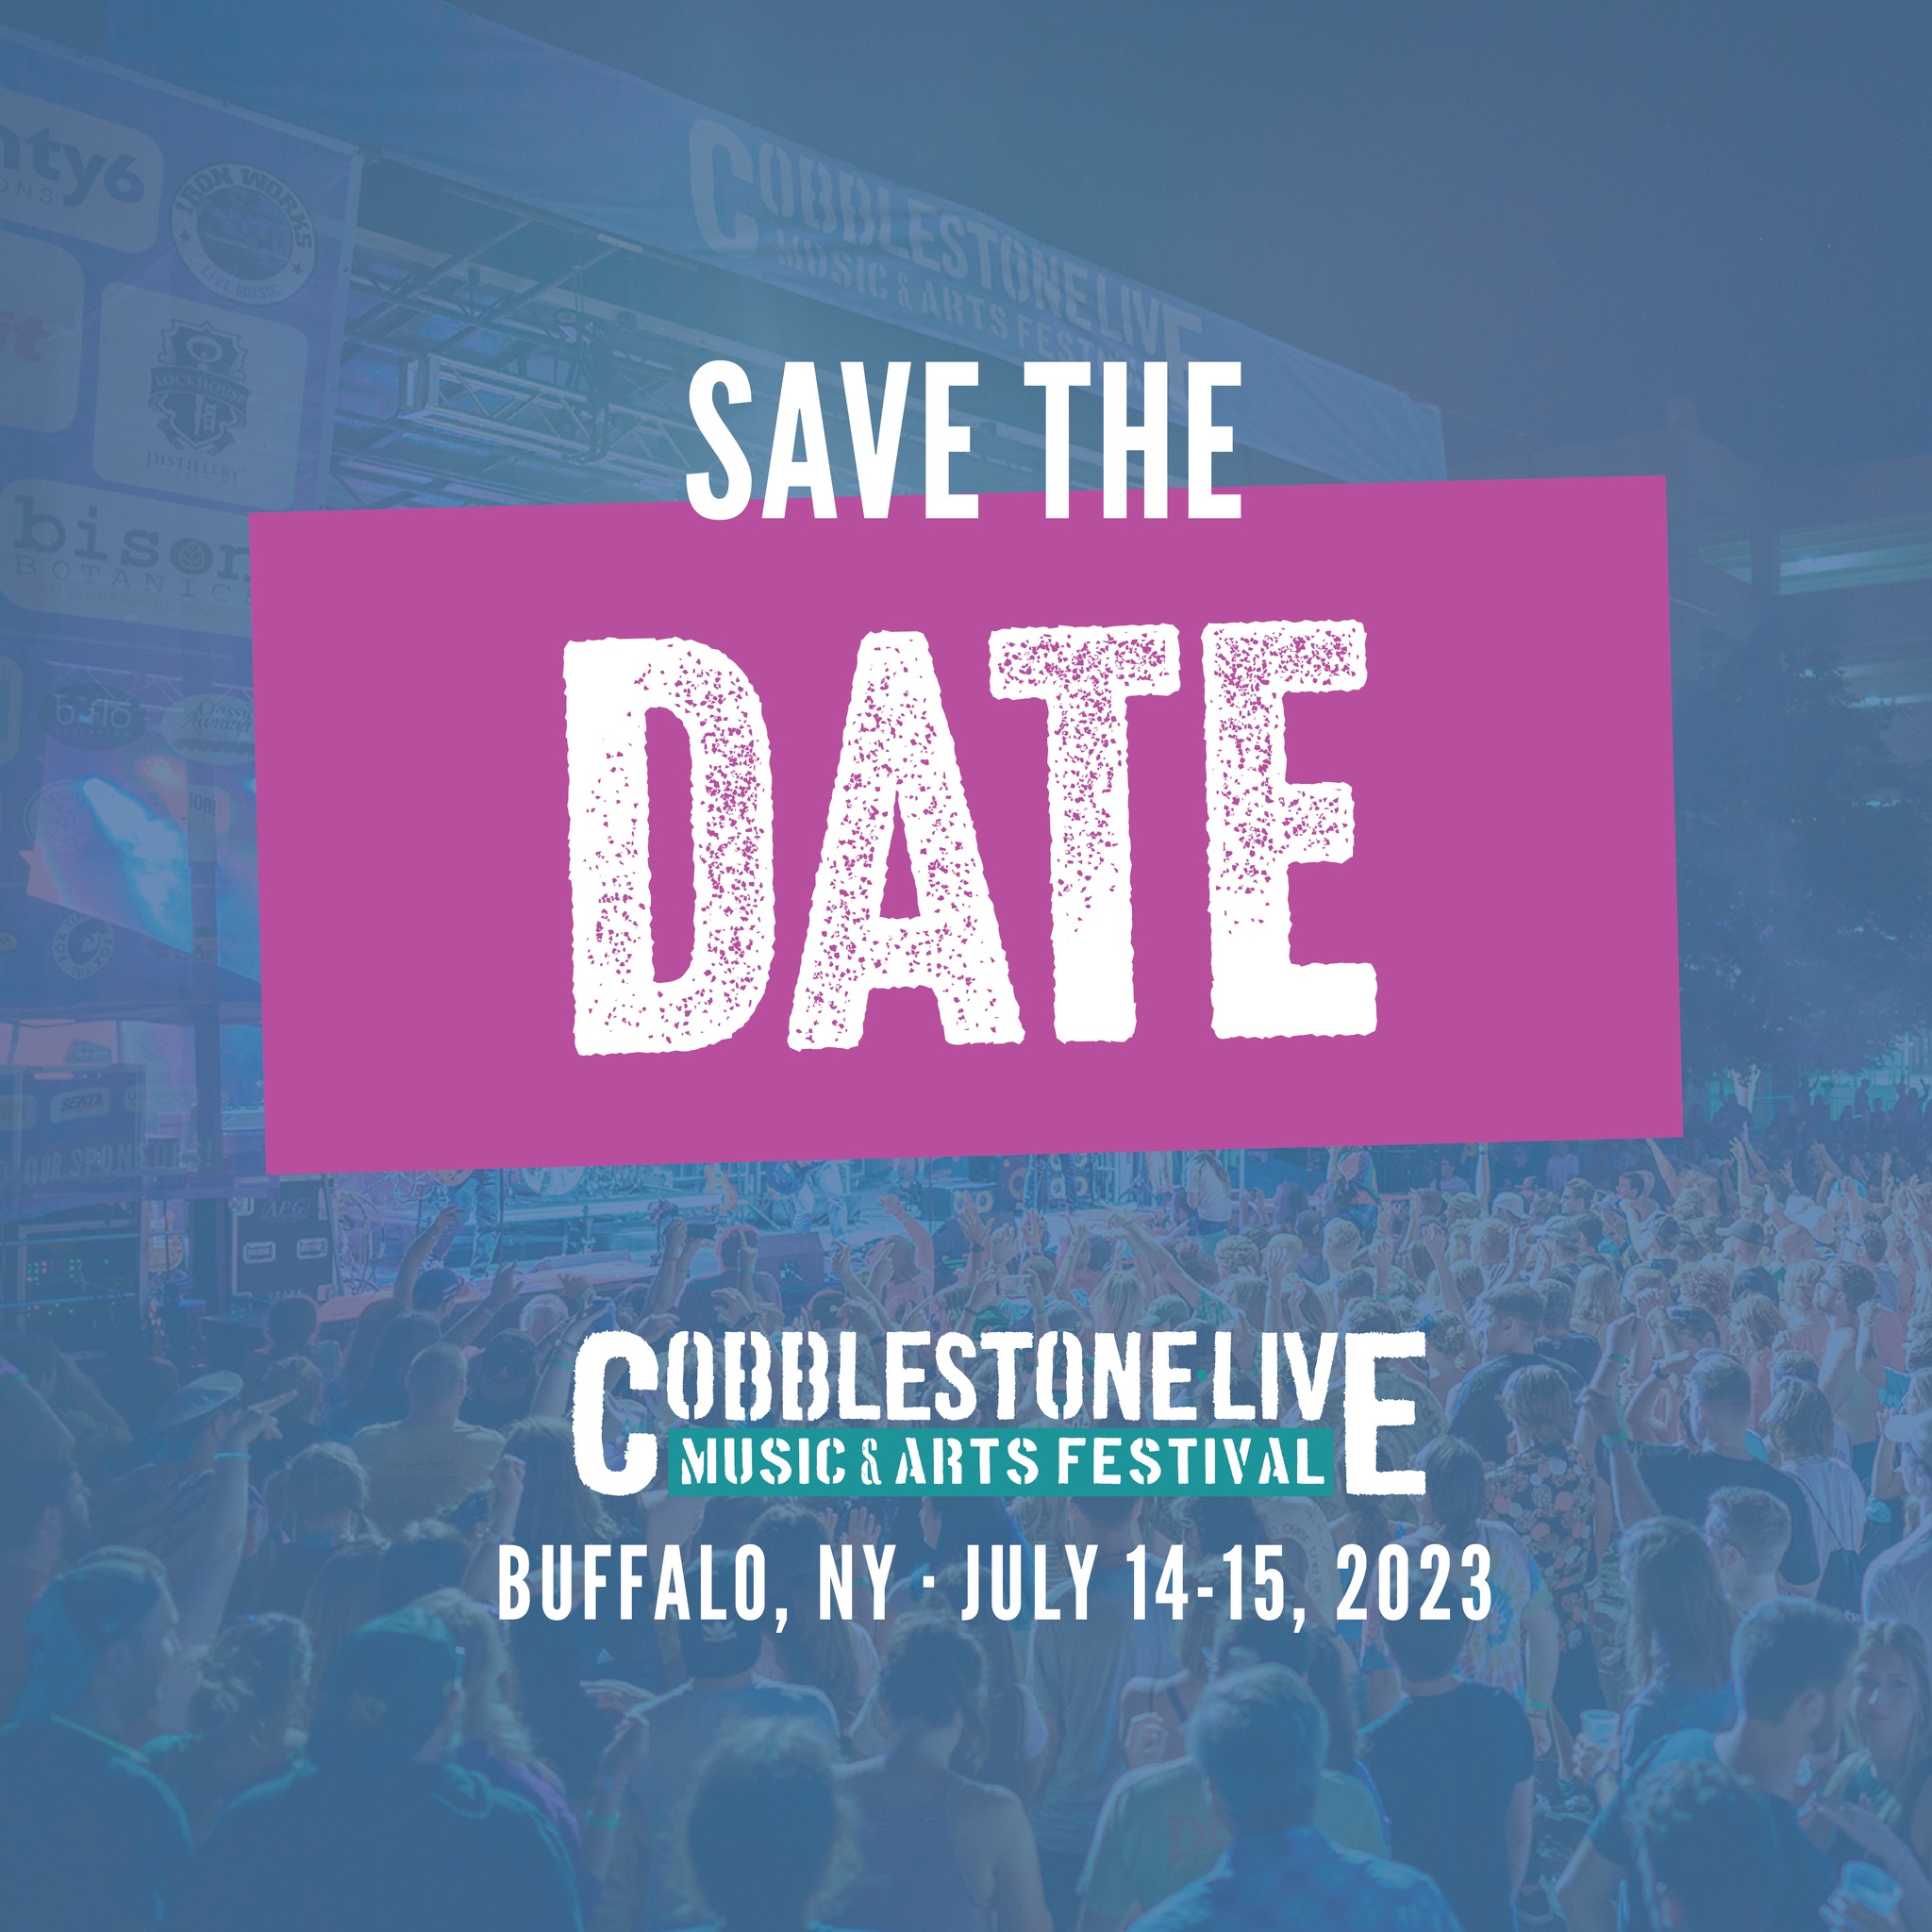 Cobblestone Live Music & Arts Festival is Back on July 14th & 15th, 2023